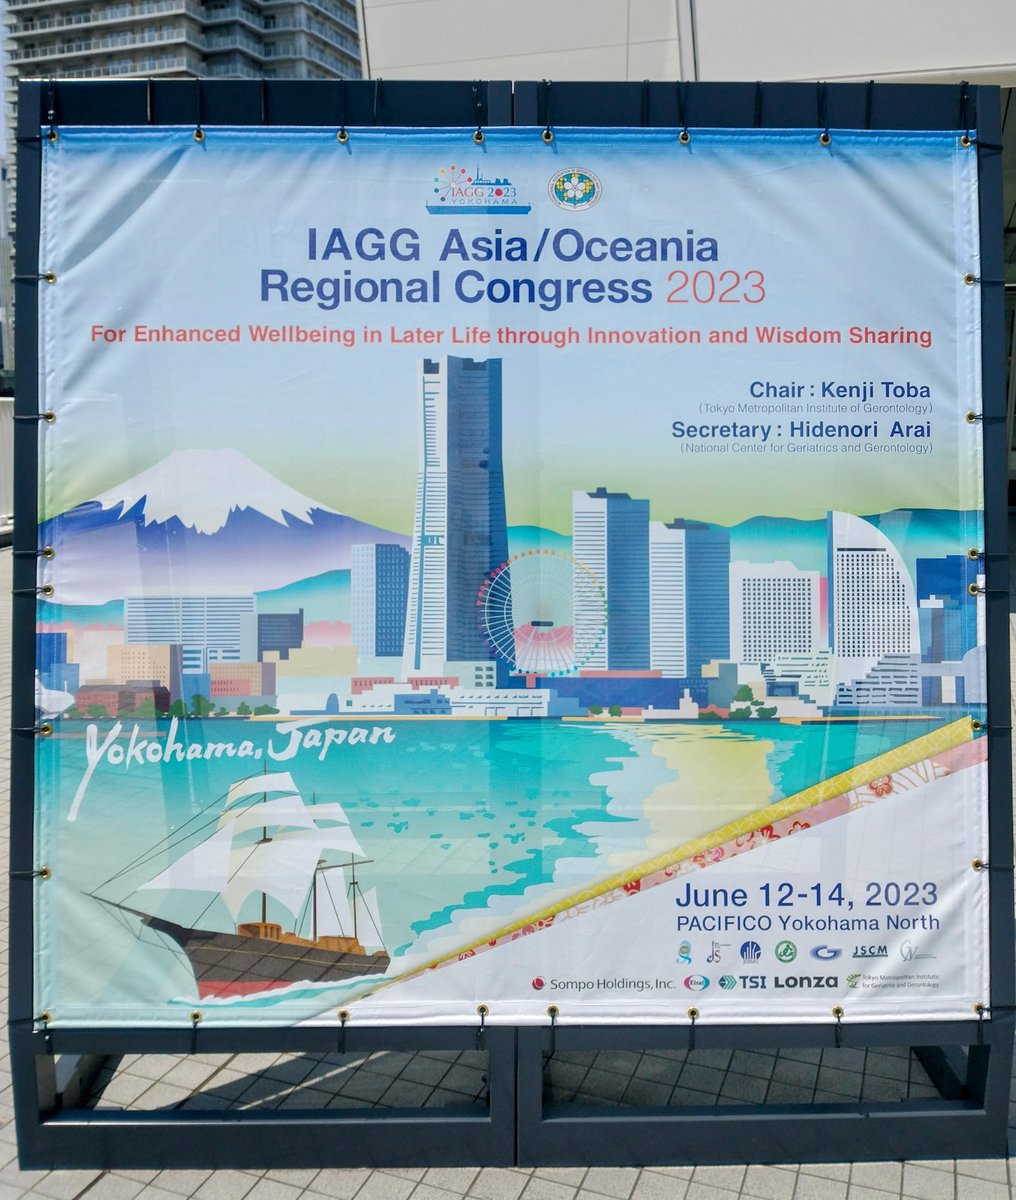 Great day of knowledge sharing at @iagg_aor2023 in Yokohama. Enjoyed representing Waseda University and sharing two presentations on the impact of COVID-19 on older adult physical activity and walkability in  Tokyo's aging neighborhoods. Thanks to everyone who came to discuss.